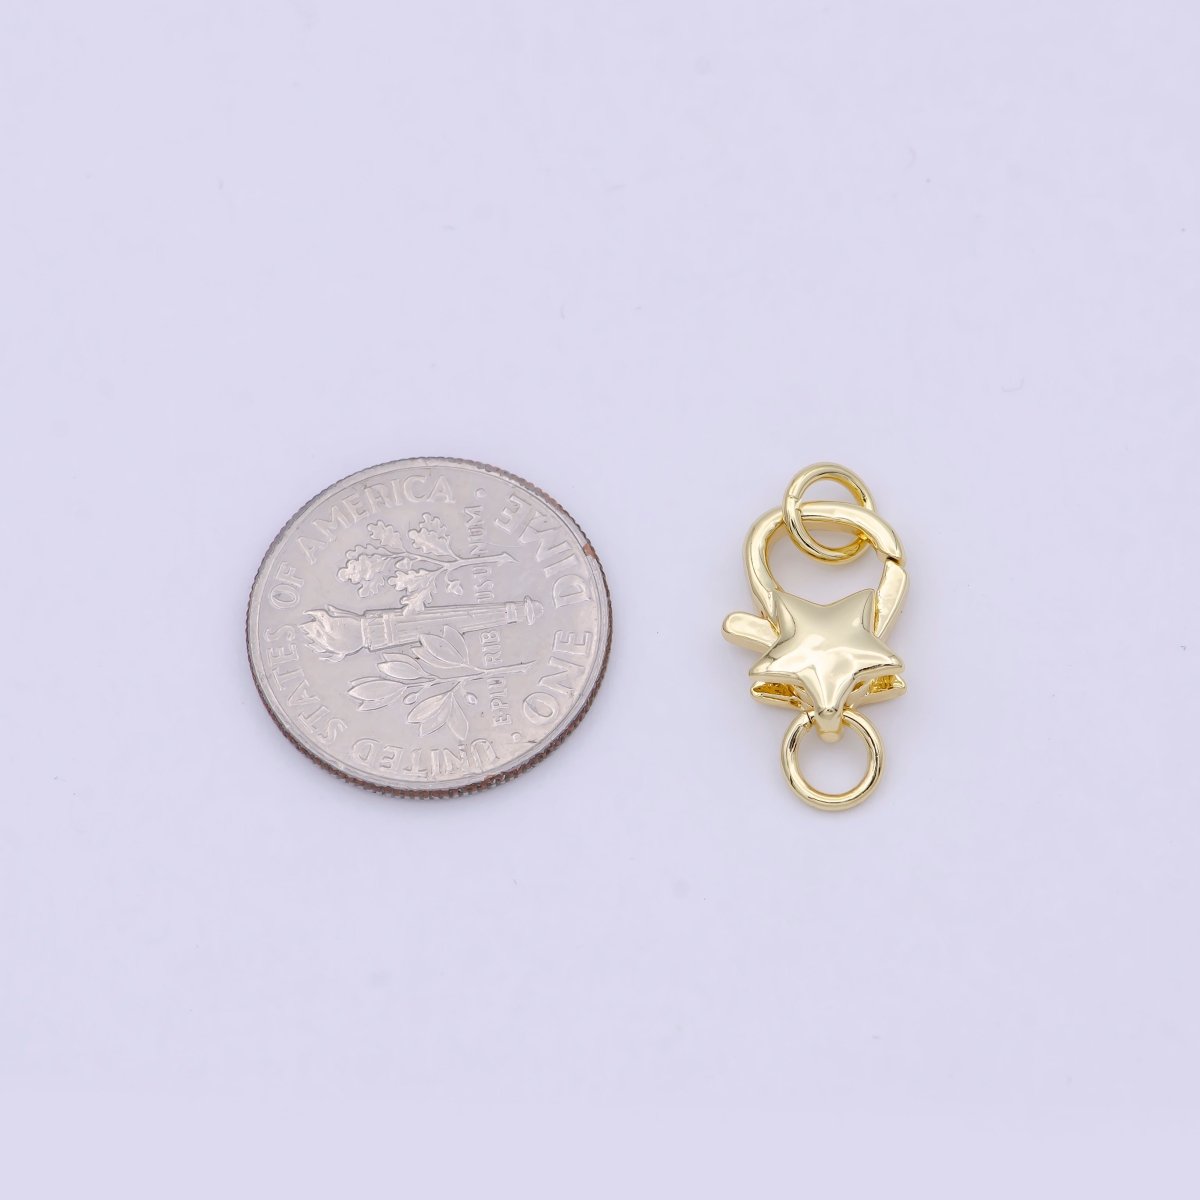 Dainty 14K Gold Filled Star Lobster Clasp Celestial Claw with Jump Ring DIY Minimalist Jewelry Supplies L-637 - DLUXCA